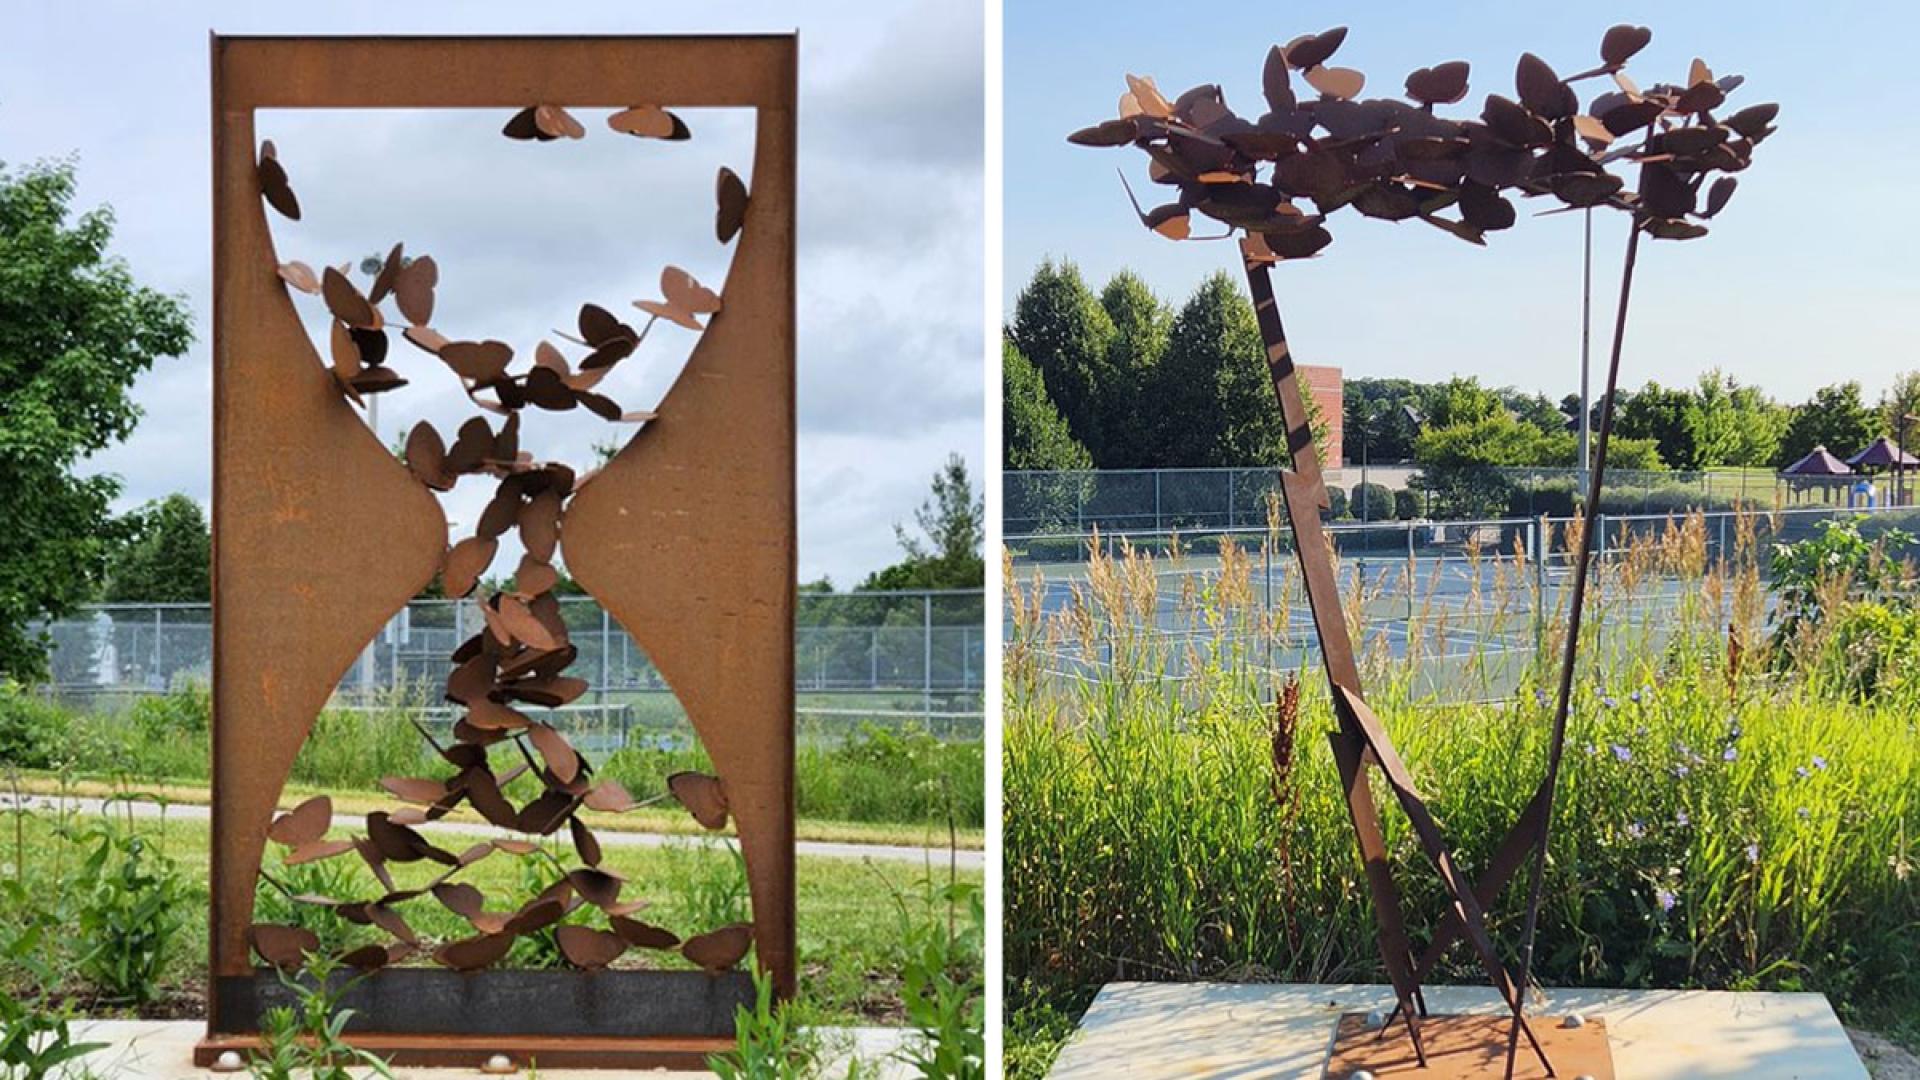 laser cut mild steel sculptures in the shapes of an hourglass and lightening bolt